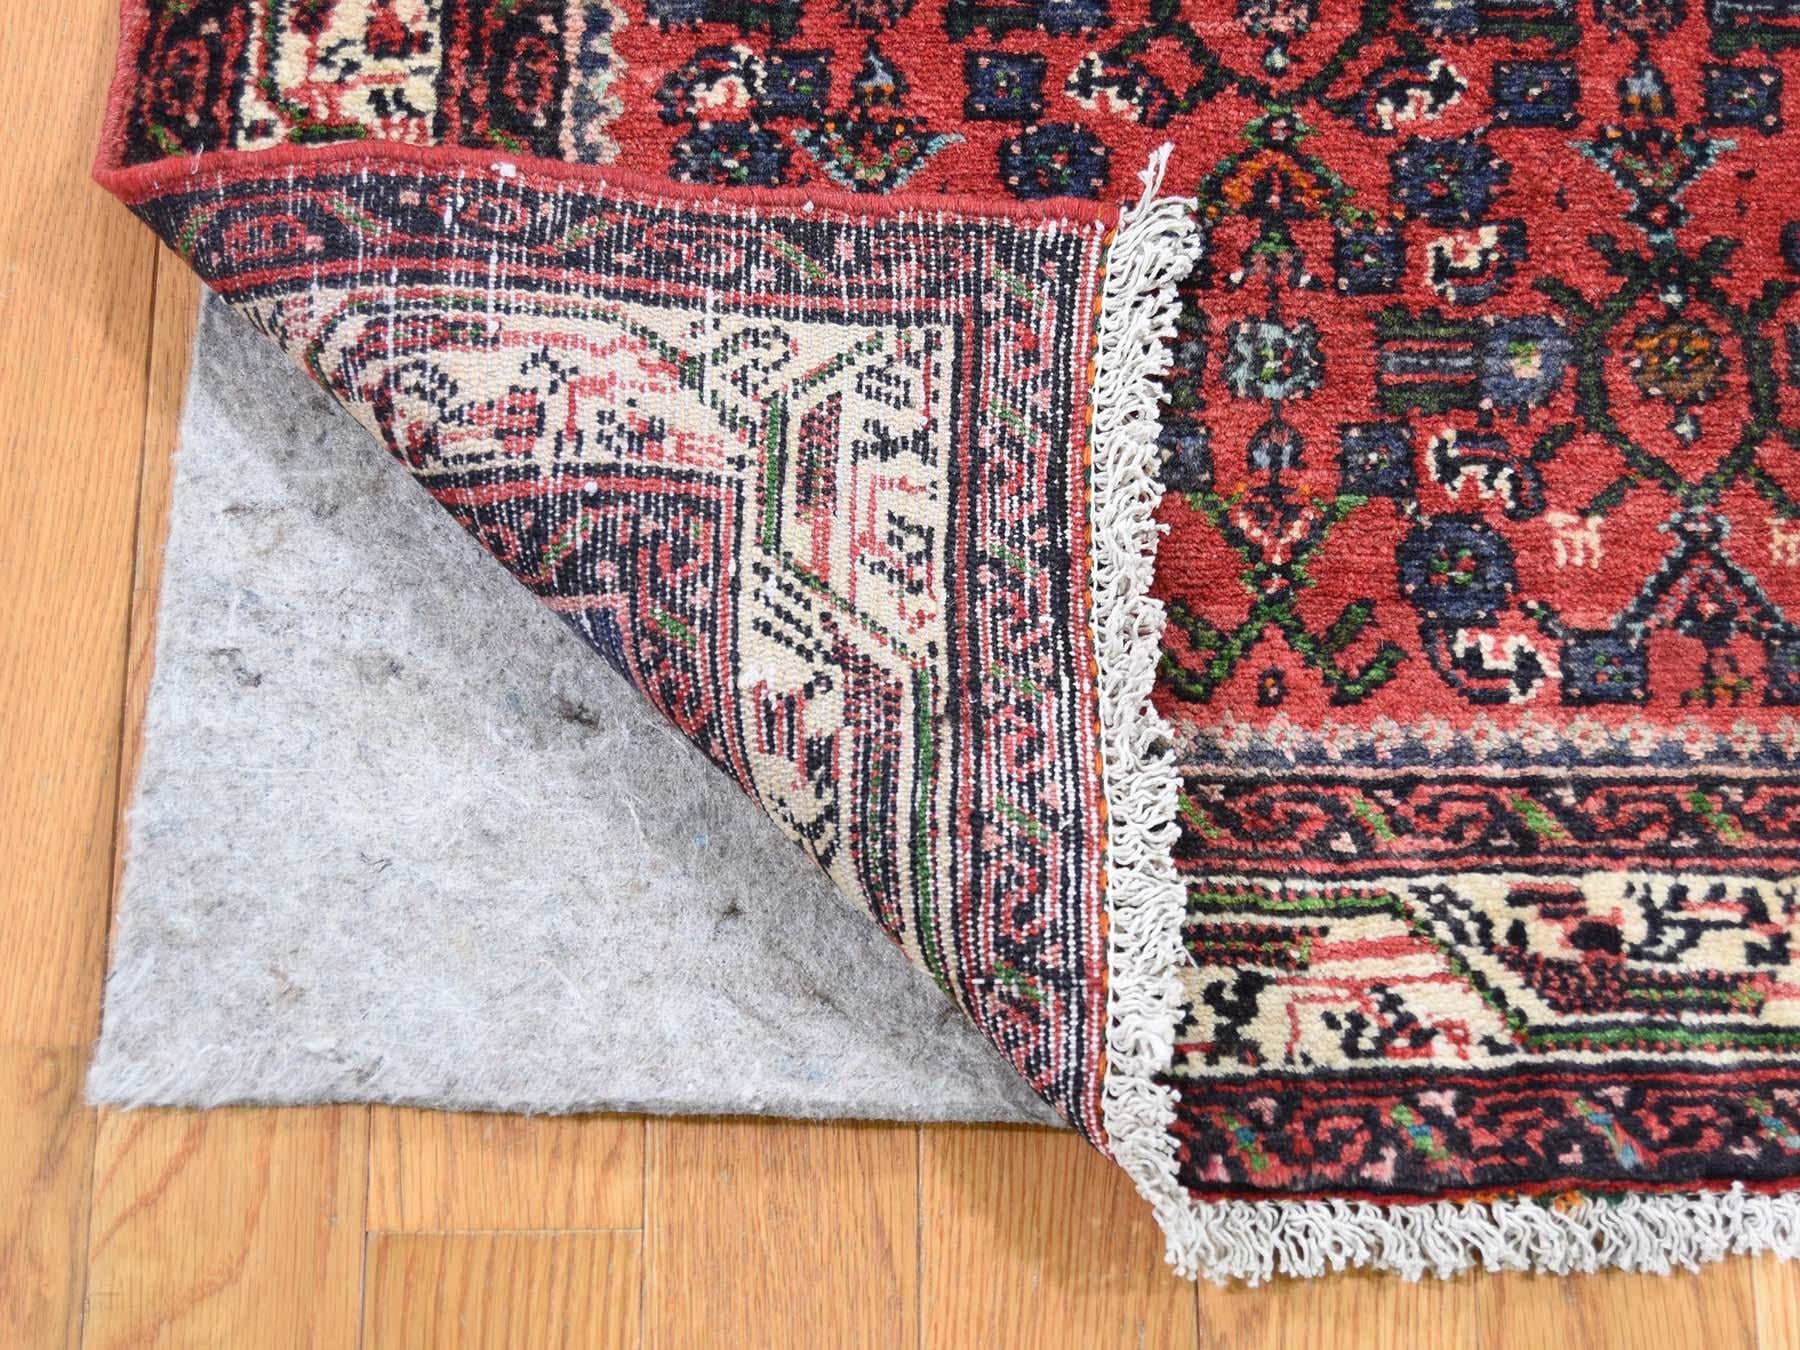 This fabulous hand knotted carpet has been created and designed for extra strength and durability. This rug has been handcrafted for weeks in the traditional method that is used to make rugs. This is truly a one of a kind piece.

Exact rug size in